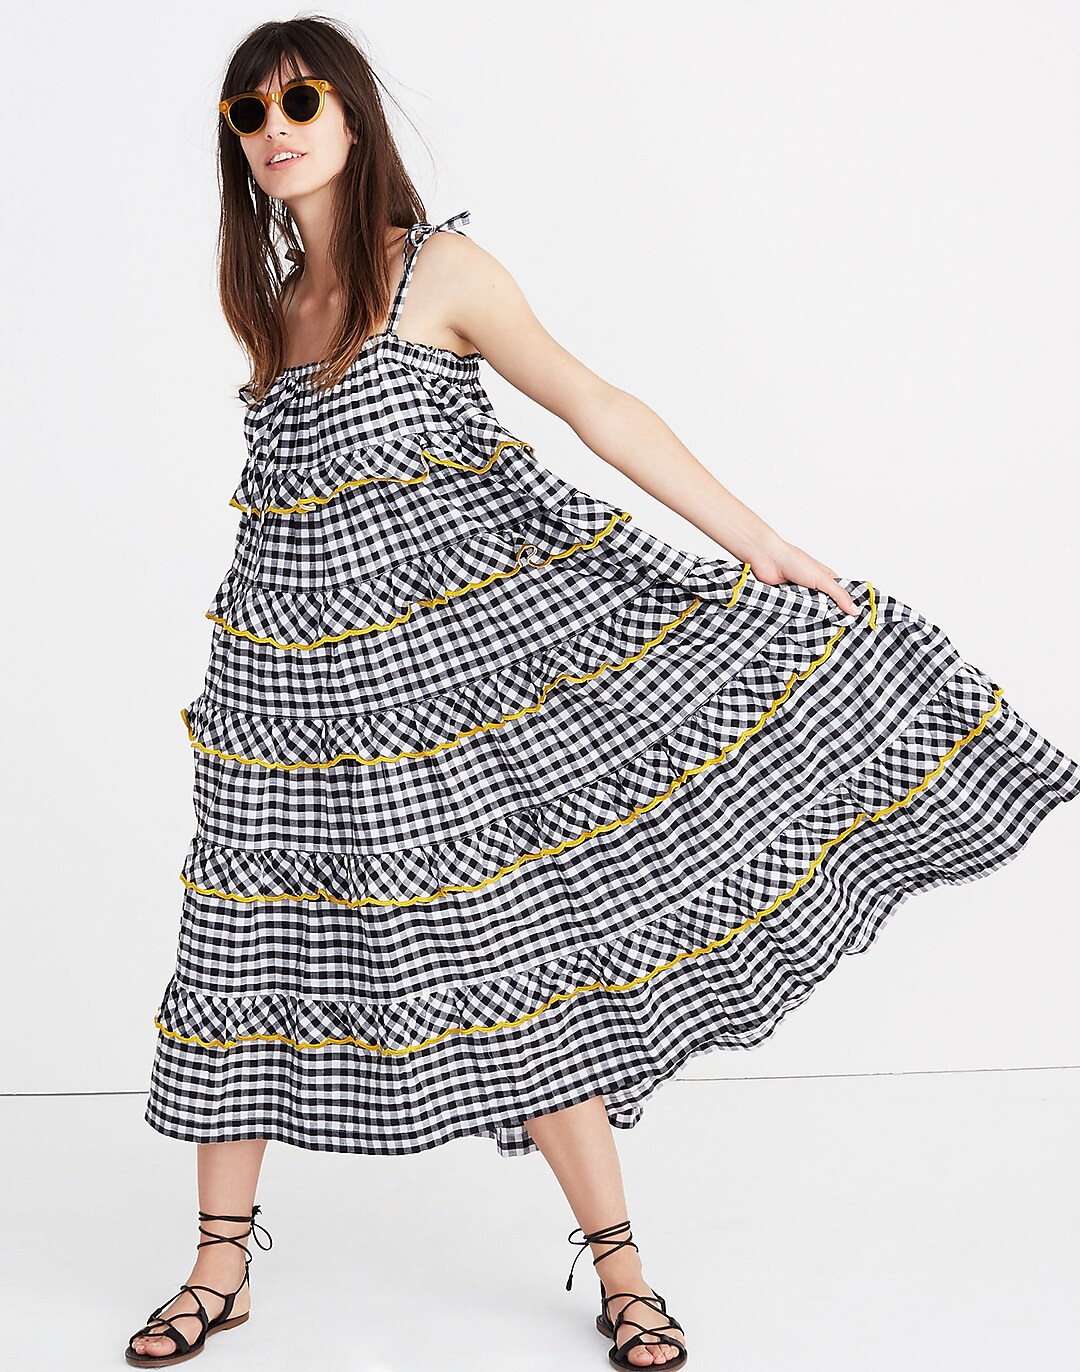 The Gina Dress - Dove Gingham - The Daily Dress